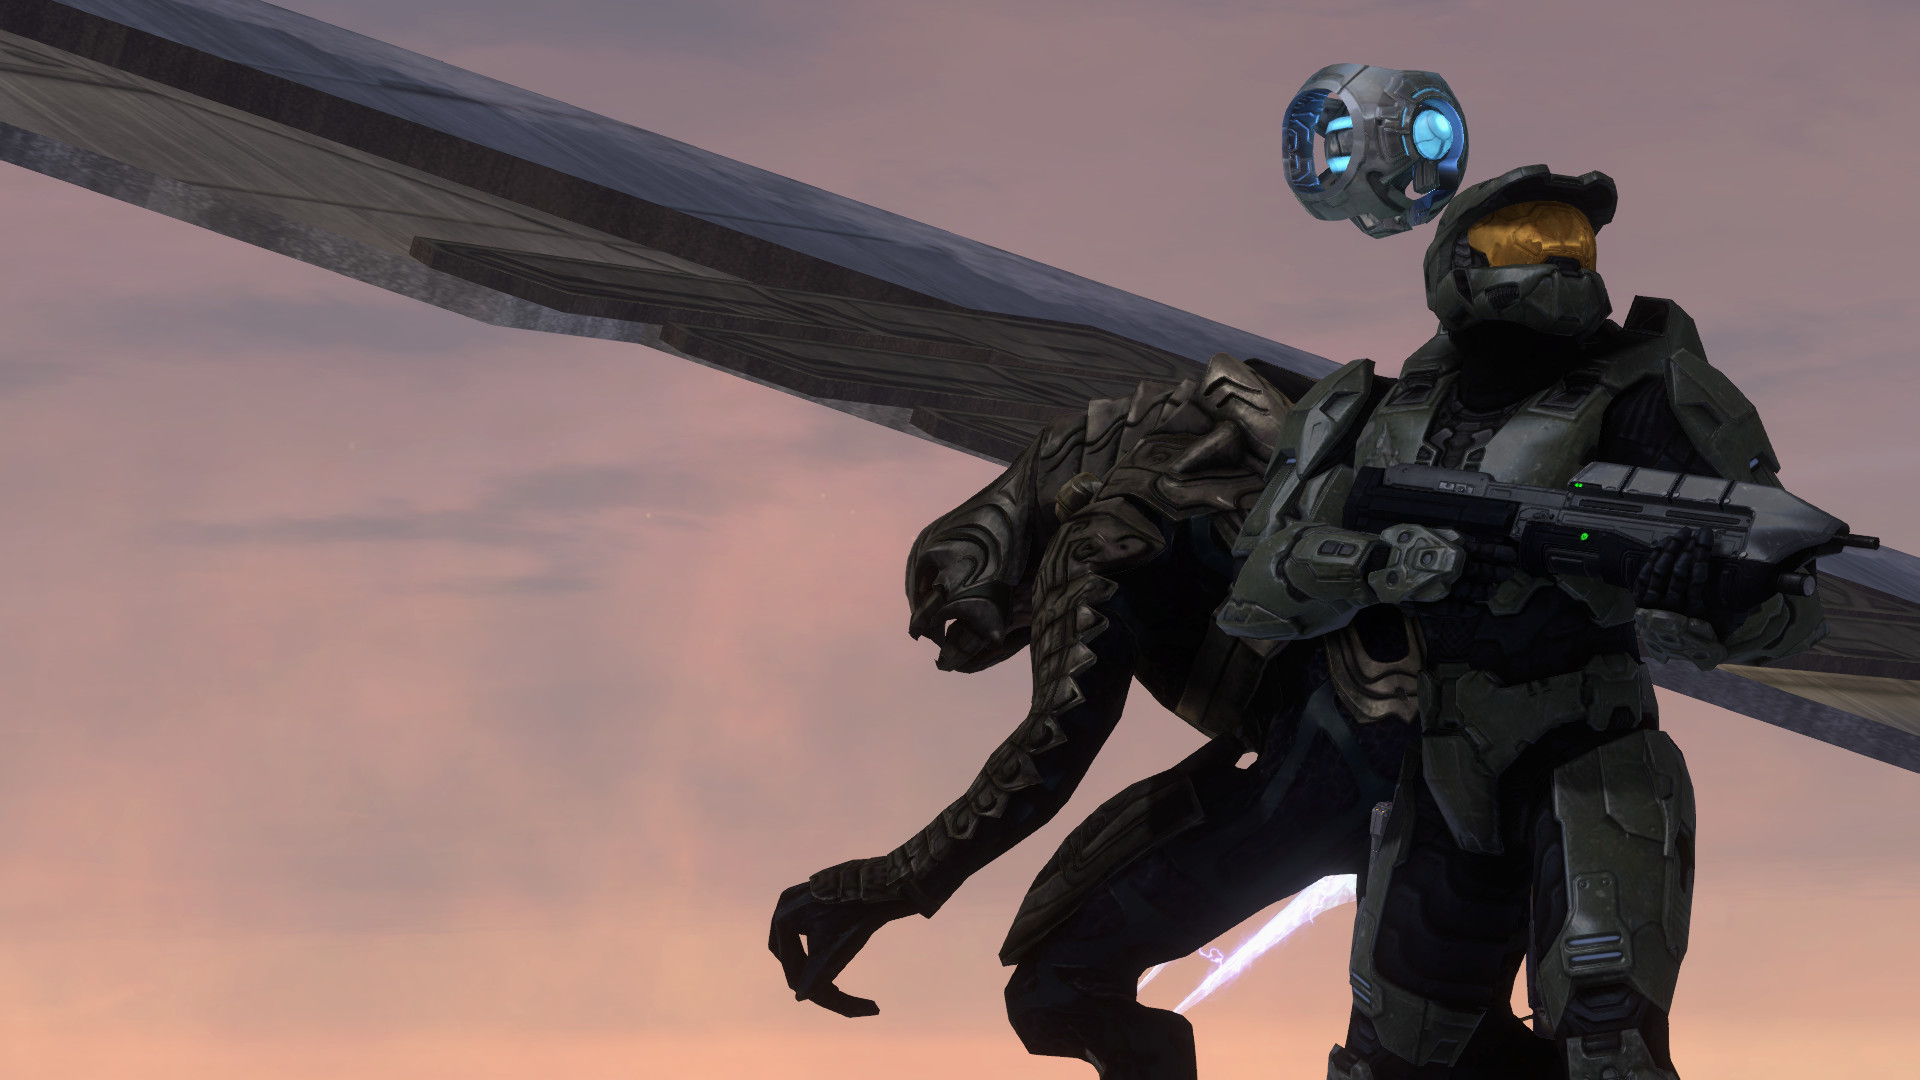 1920x1080 And now, we come to Halo 3…